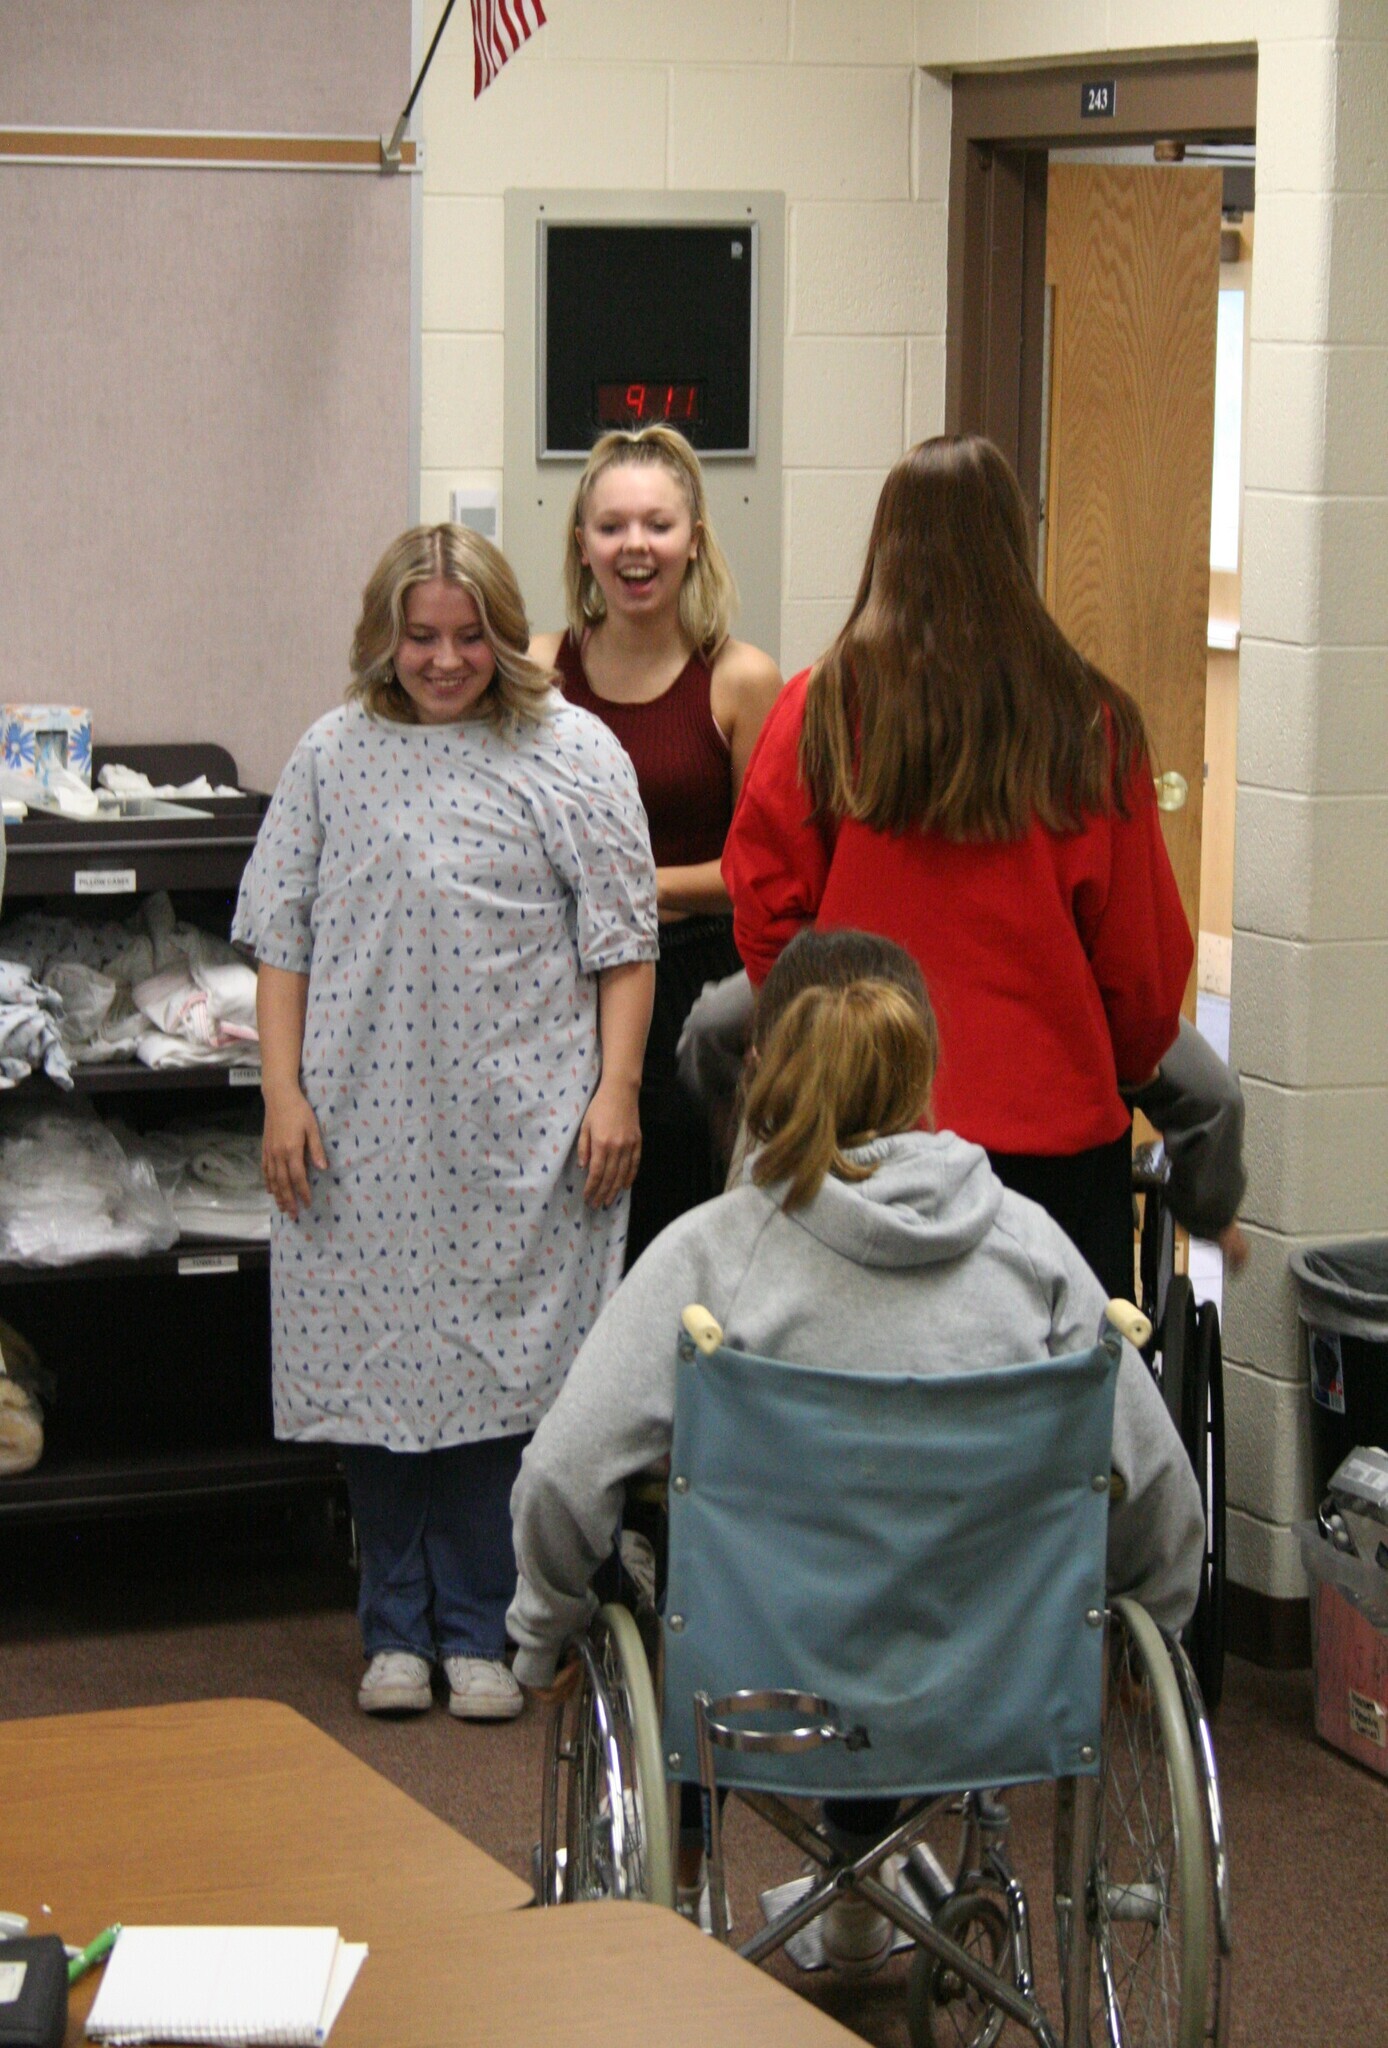 Medical Occupations students dressed in gowns